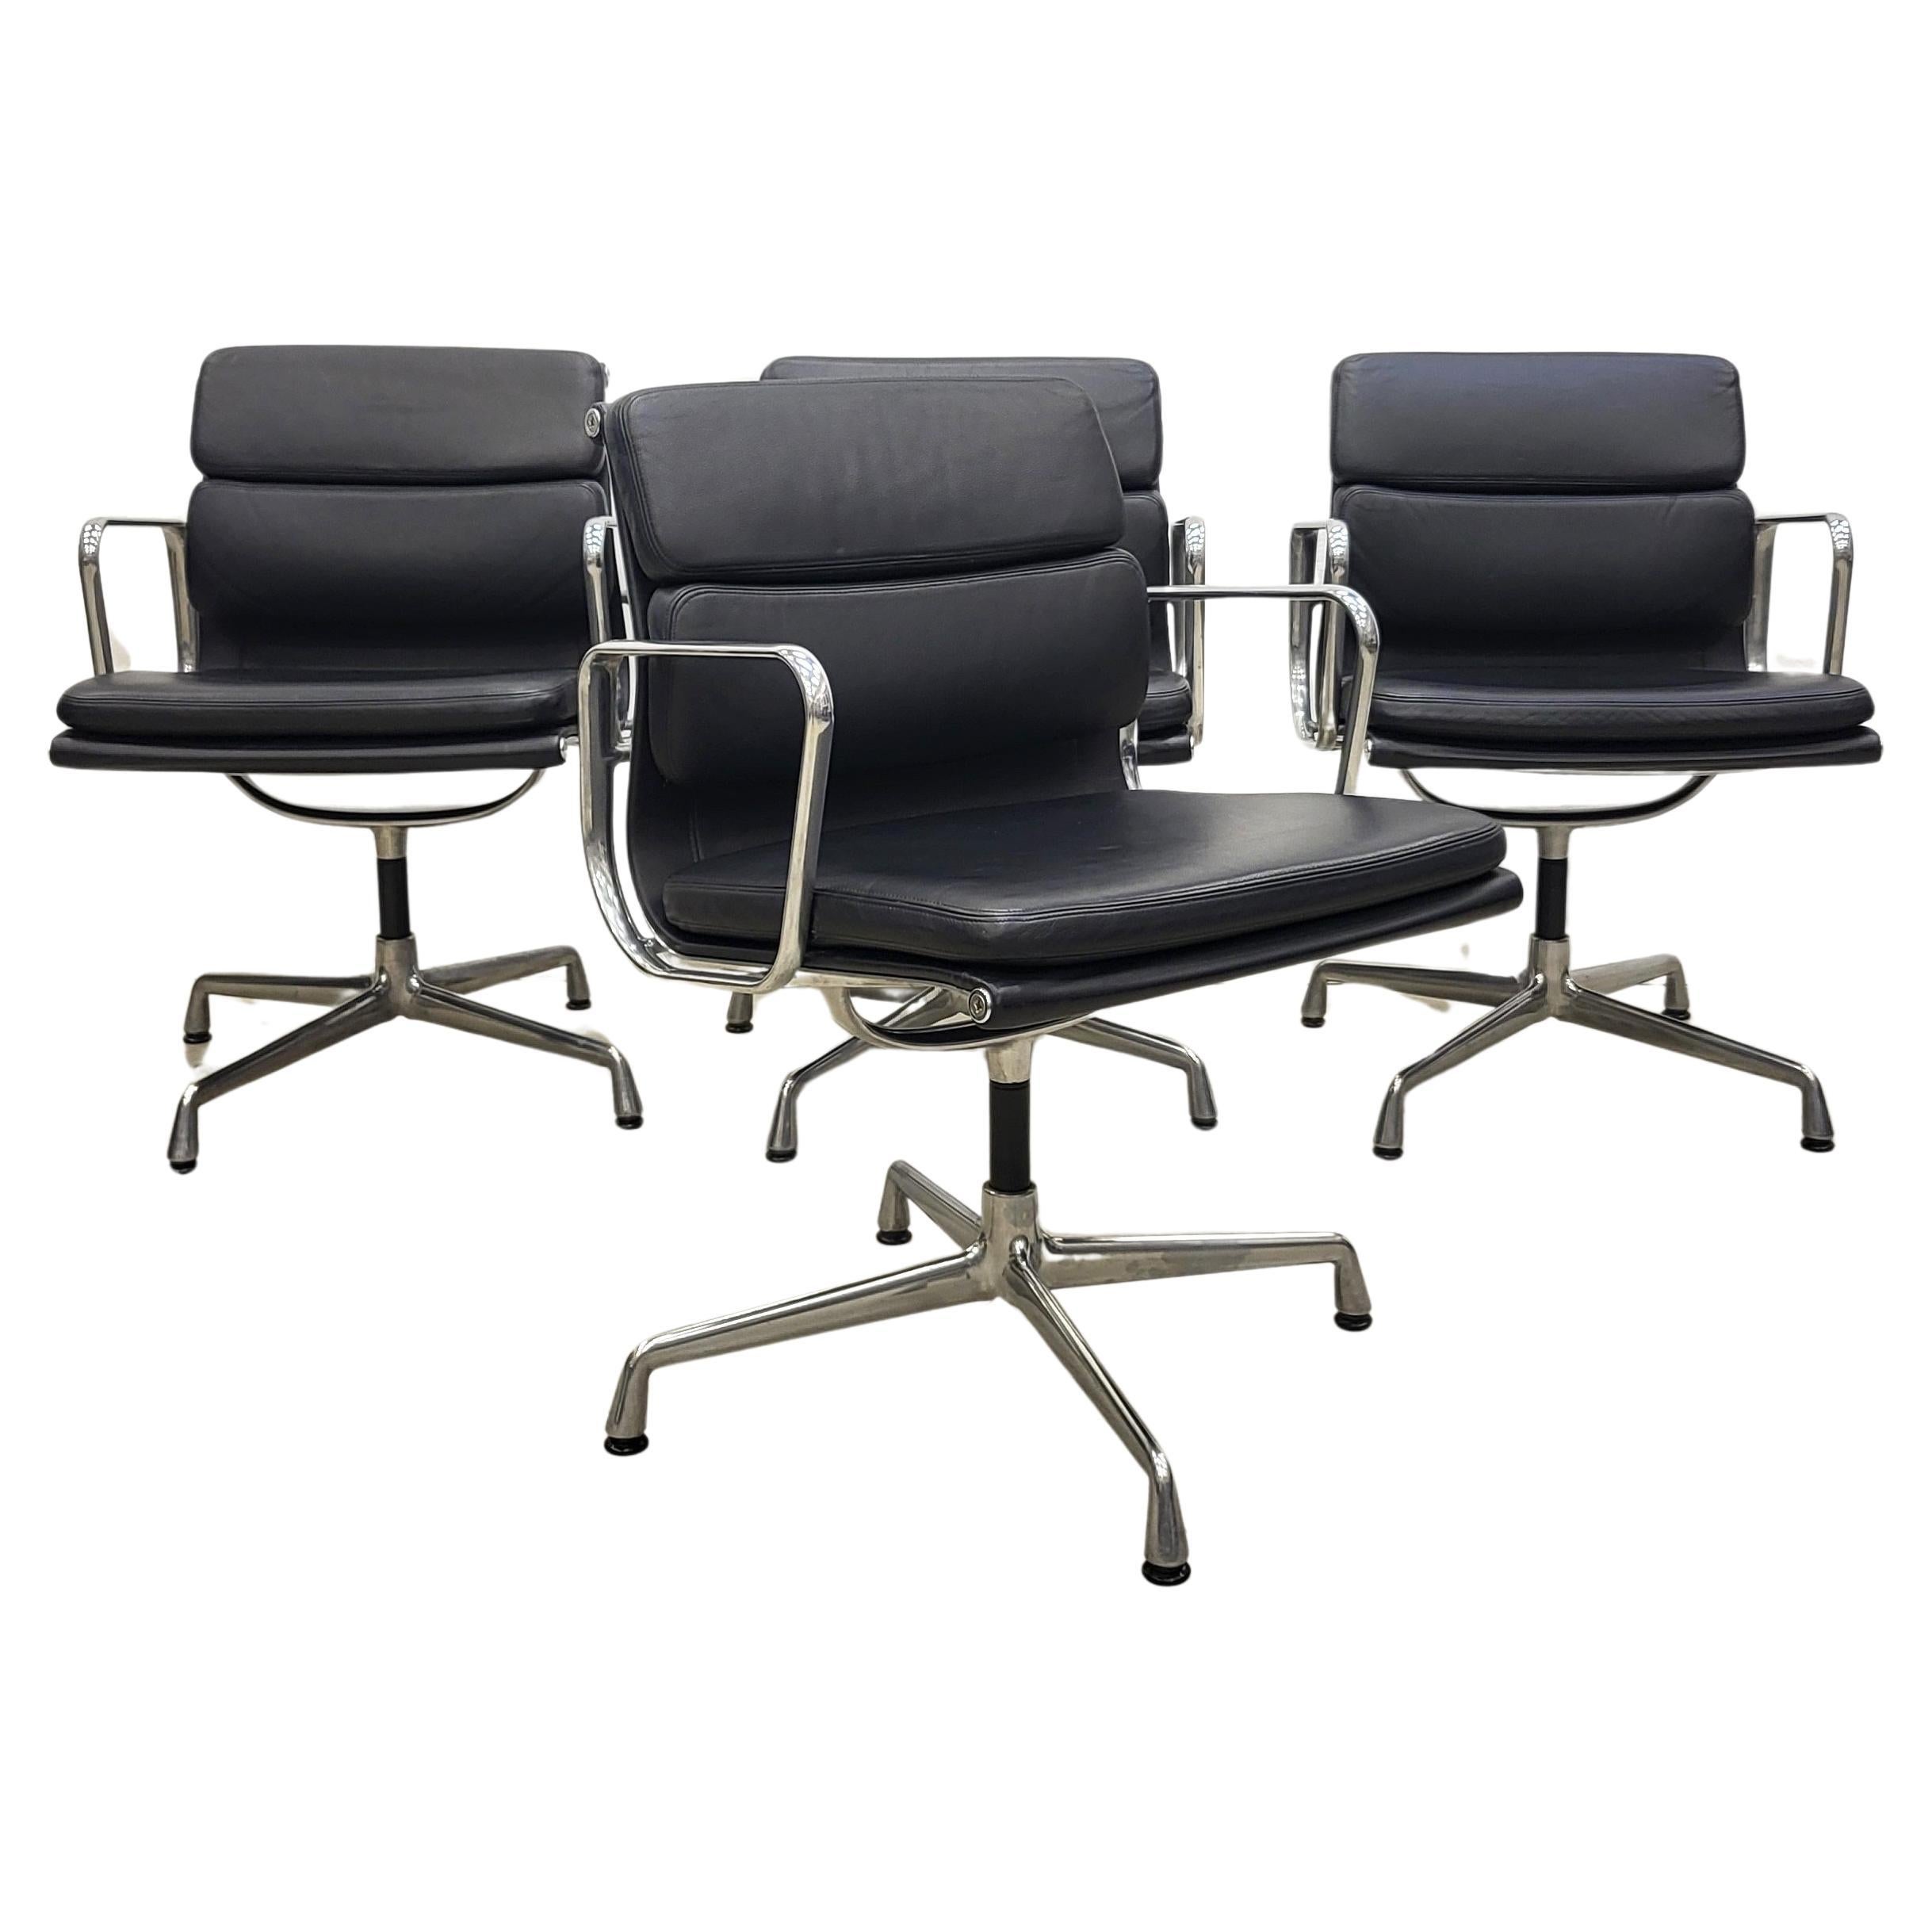 4x Vitra EA208 Soft Pad Office Chair by Charles Eames, 2006 Model